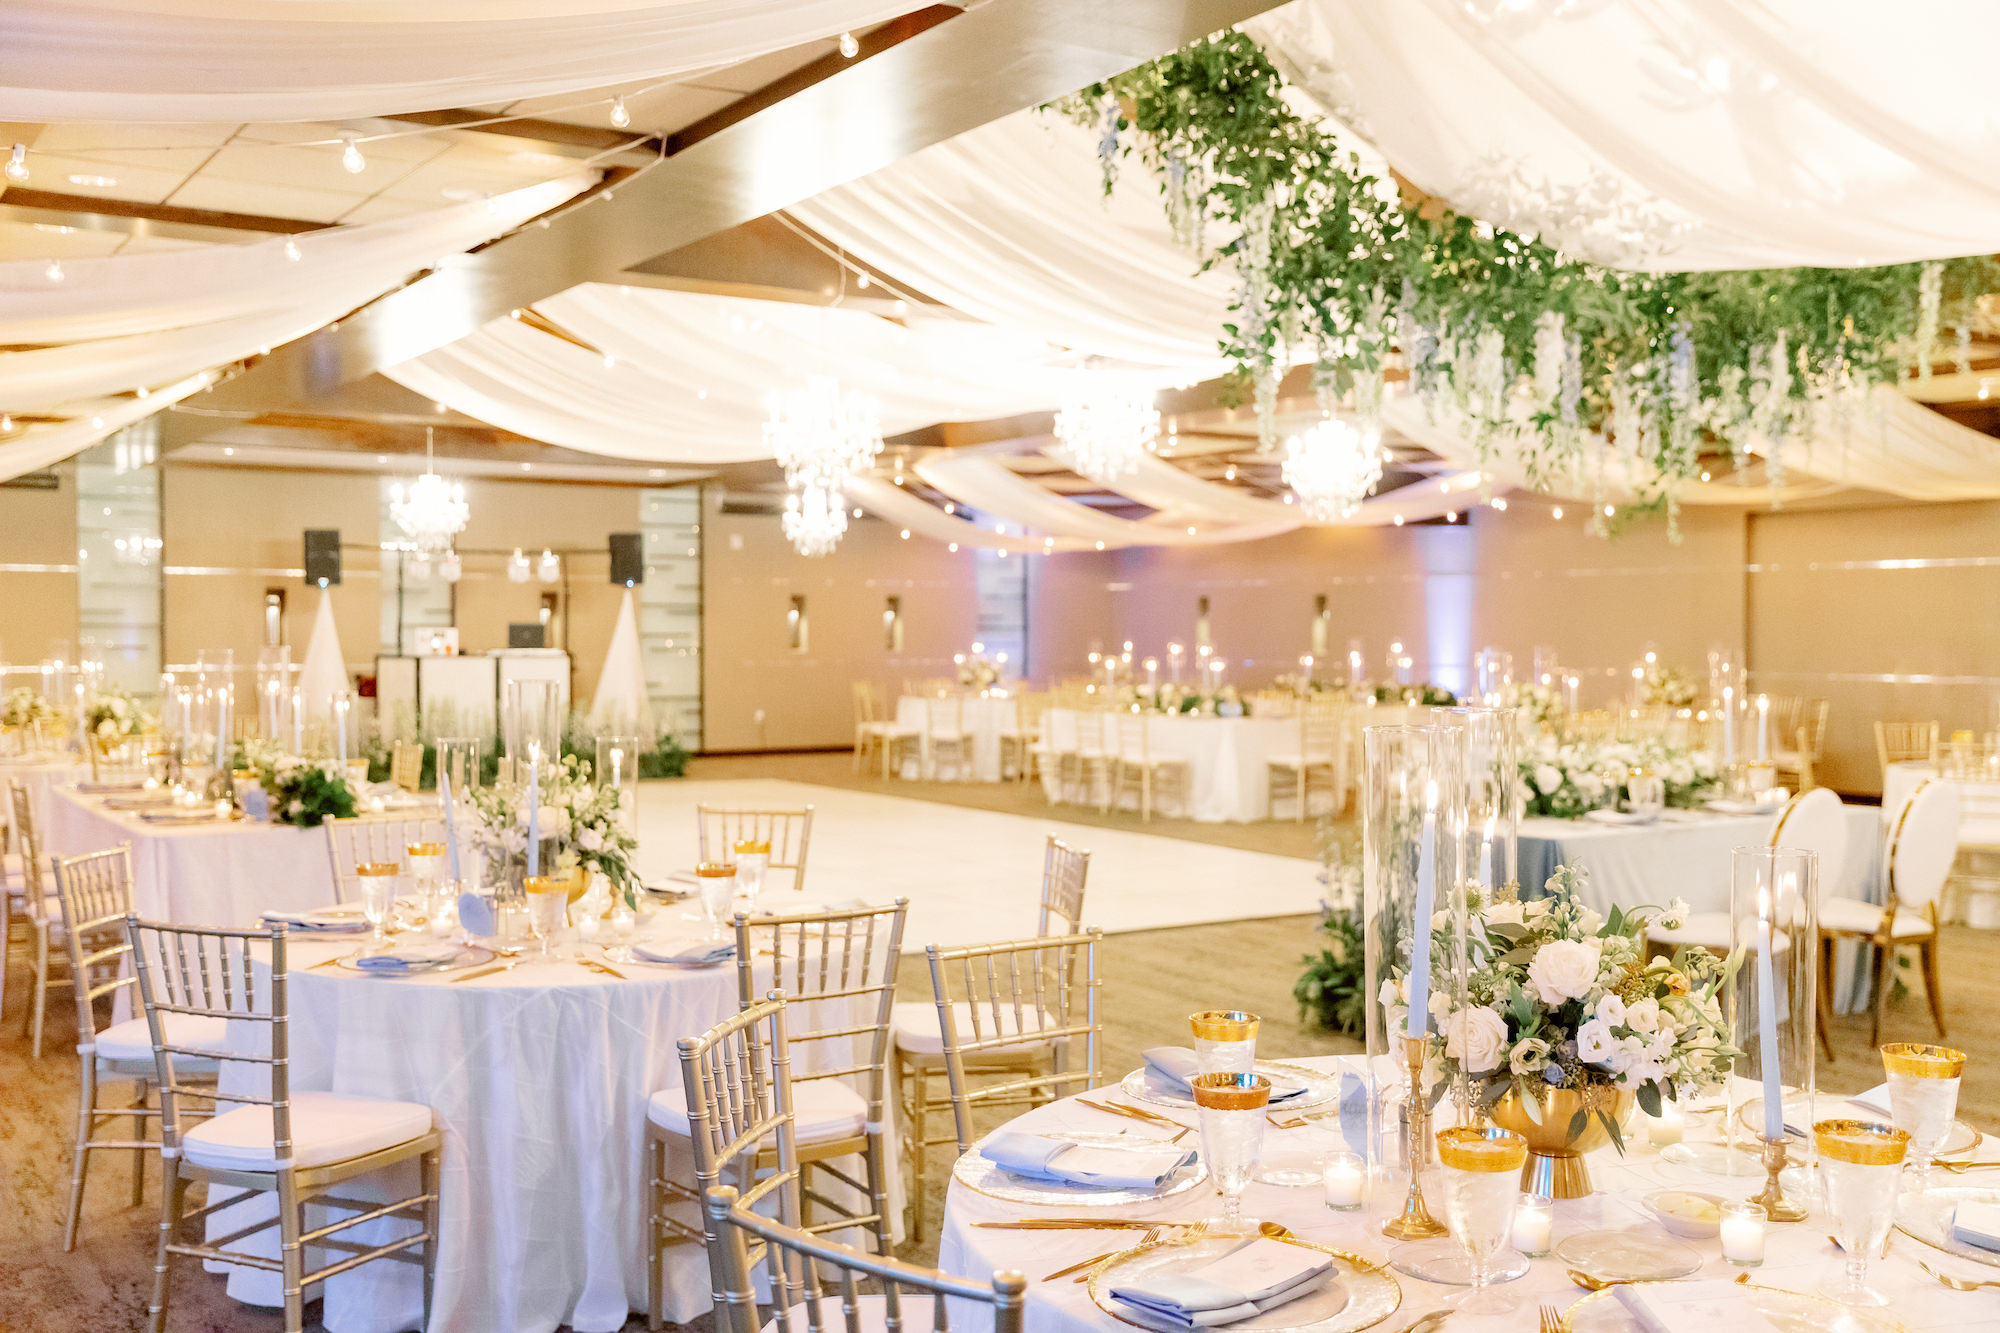 Elegant Reception Decor Ideas | Romantic Indoor White and Gold Spring Wedding Reception with Gold Chiavari Chairs and White Ceiling Drapery with Hanging Floral Arrangements | Sarasota Wedding Planner MDP Events | Florist Botanica International Design Studio | Venue Marie Selby Gardens